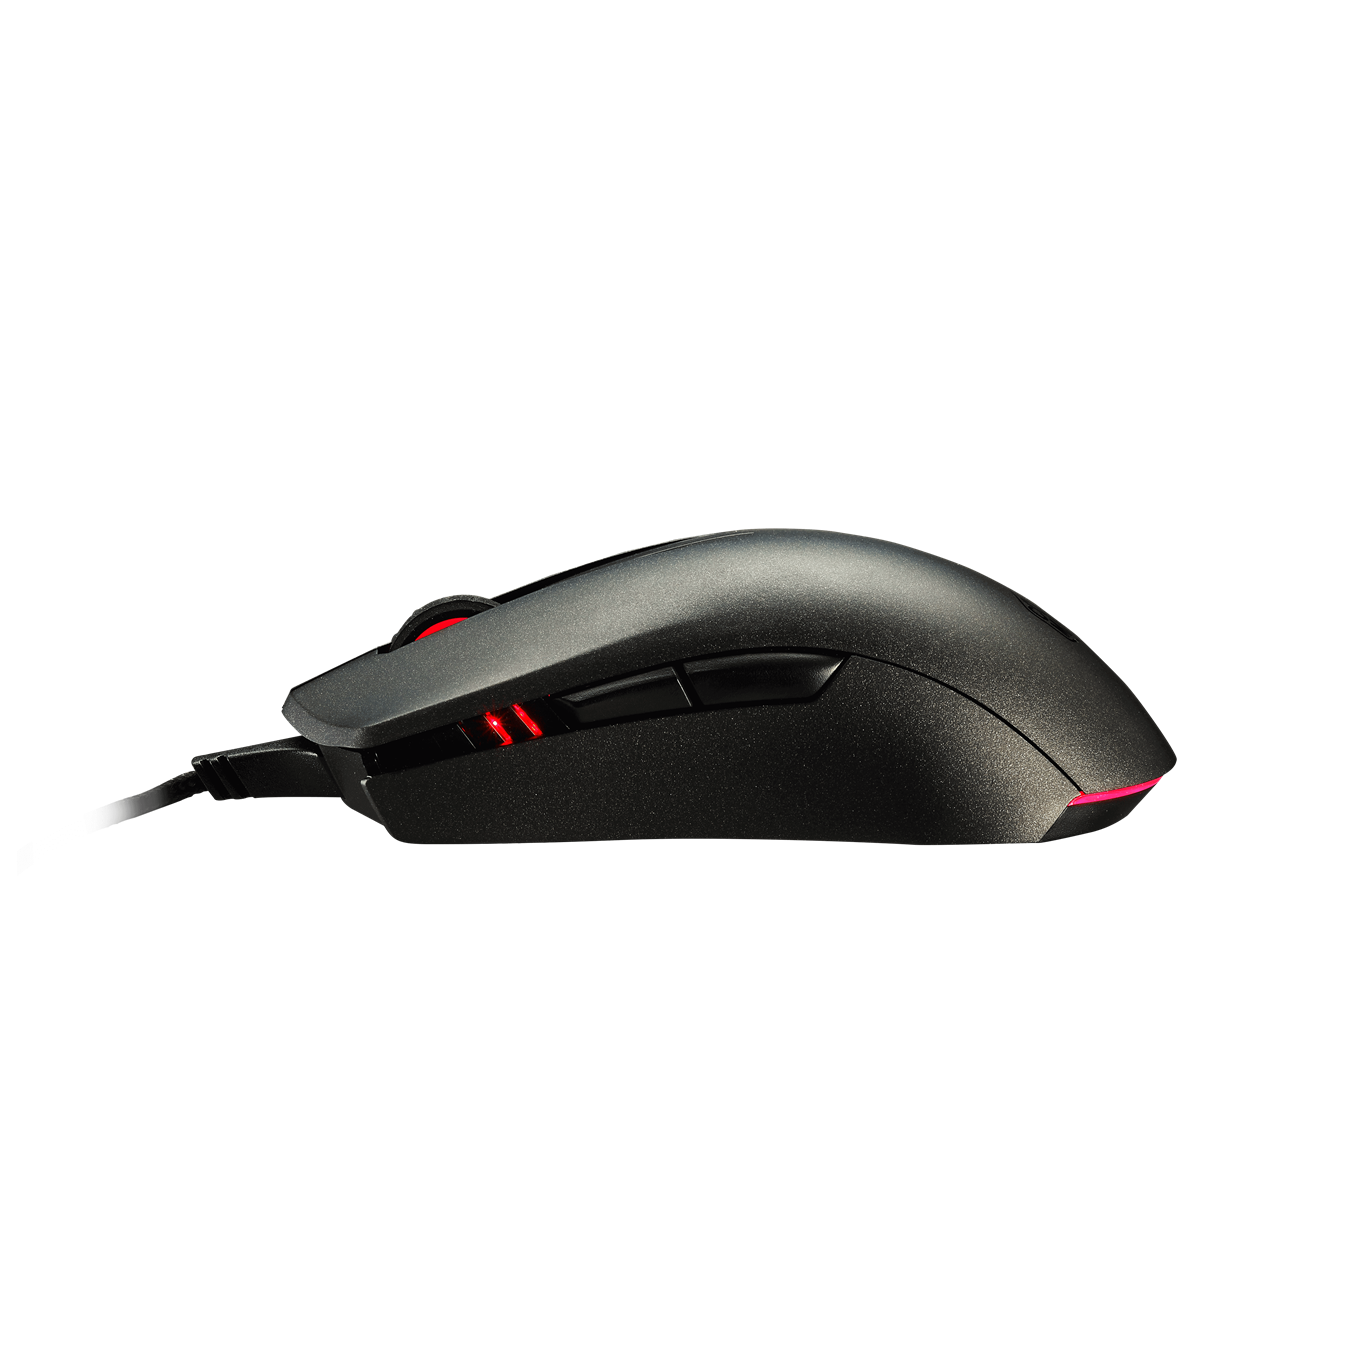 MasterMouse Pro L - Customize with 16.7million colors and lighting modes for DPI indicator and glowing beam on bottom.